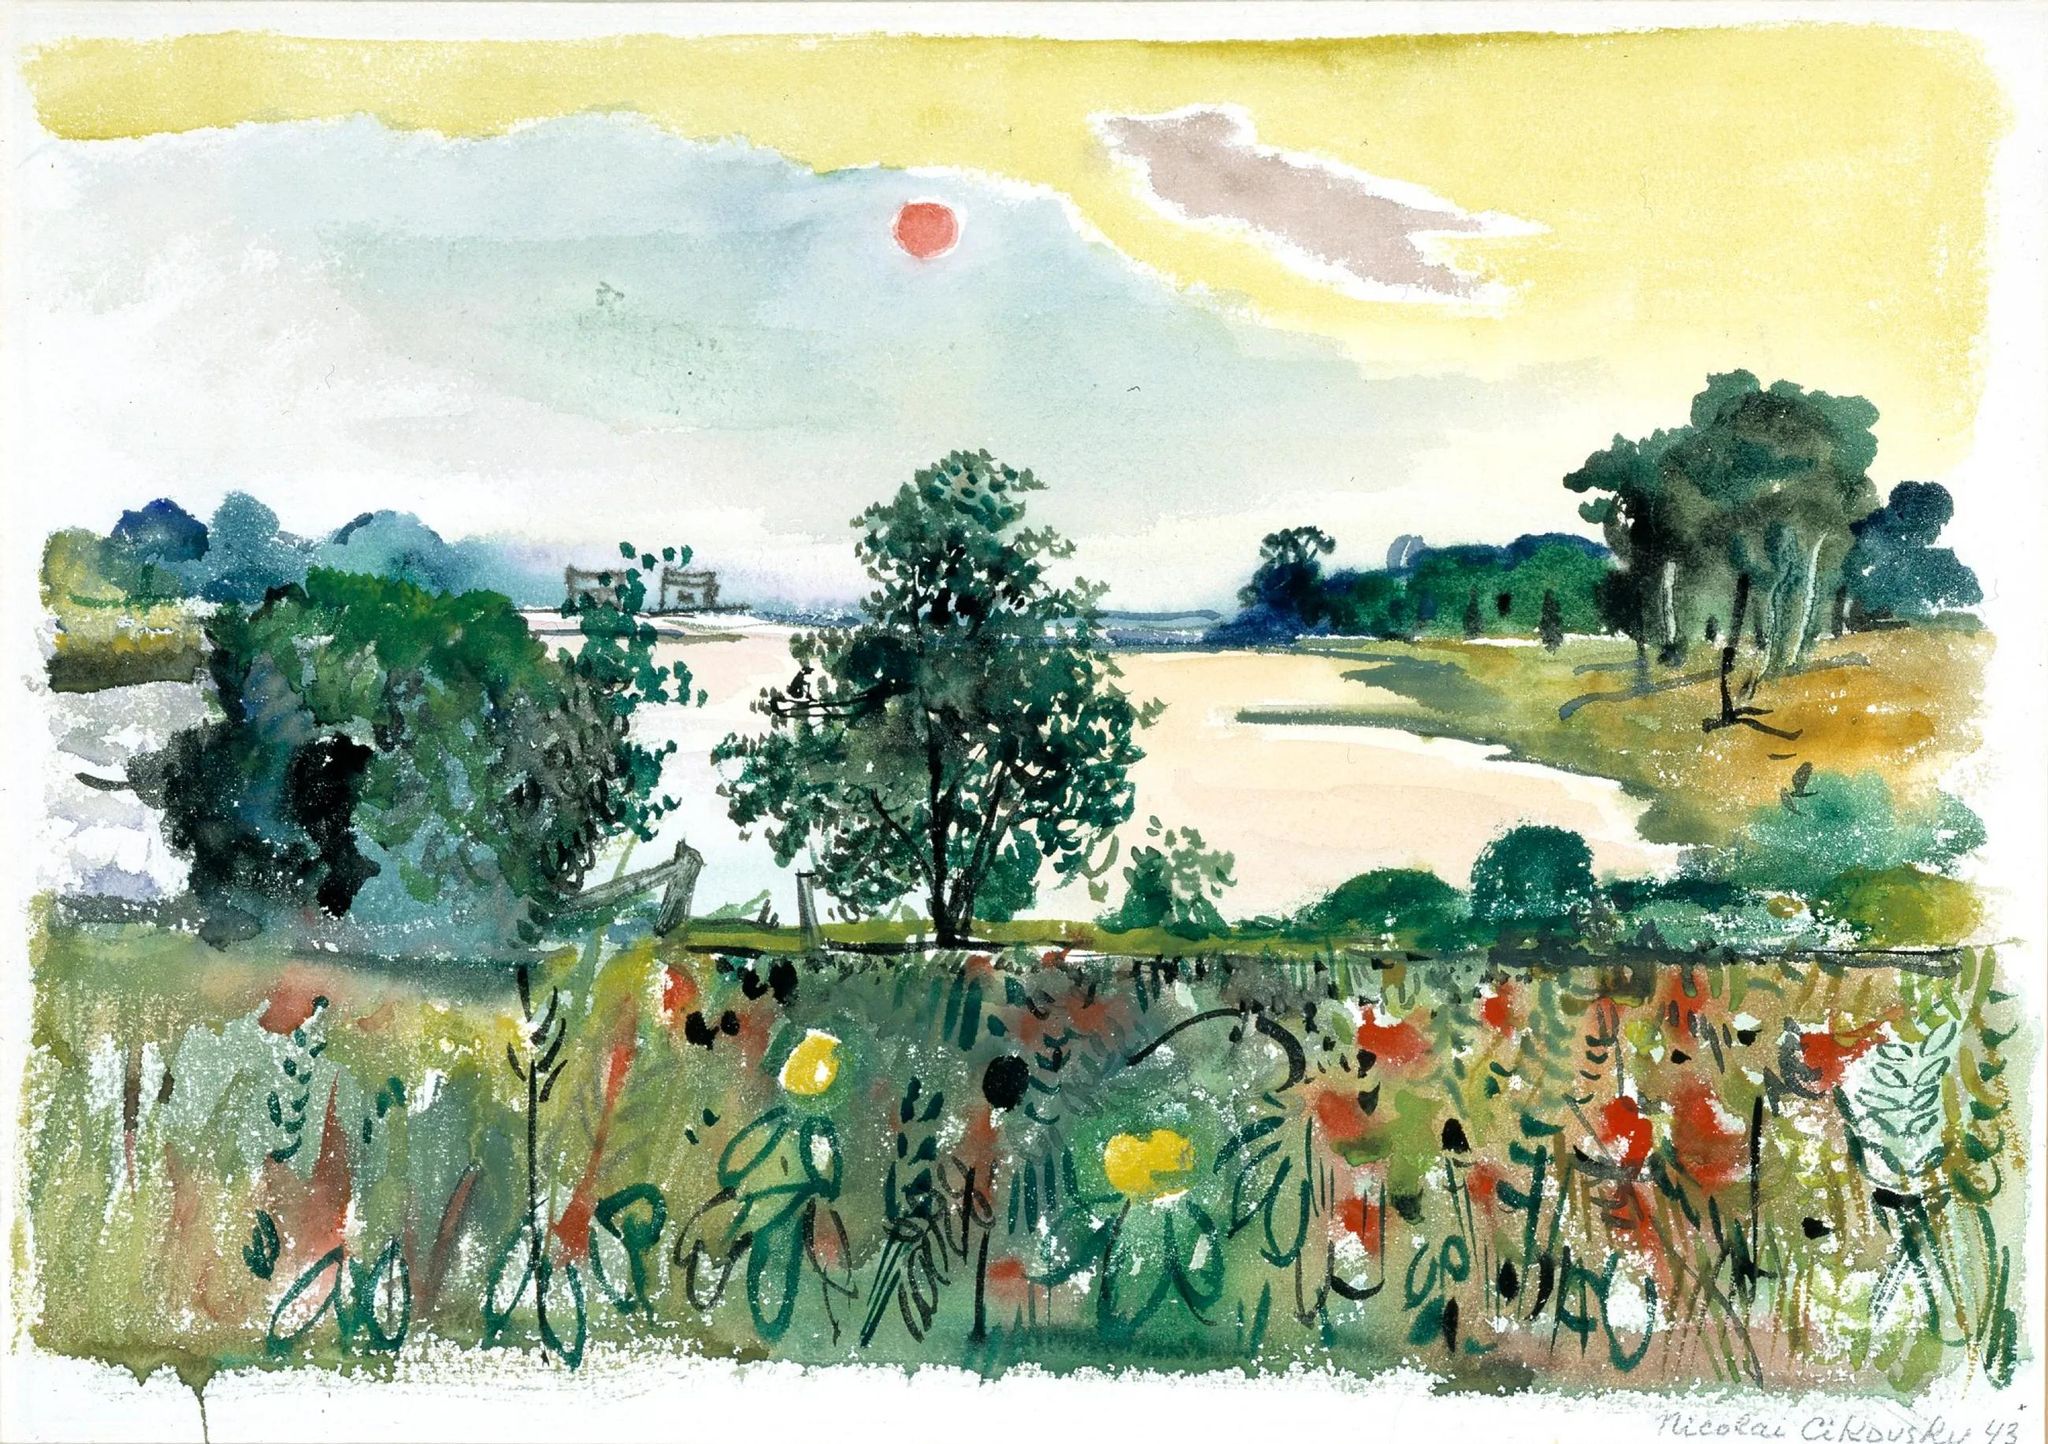 (Landscape with Animated Foreground)